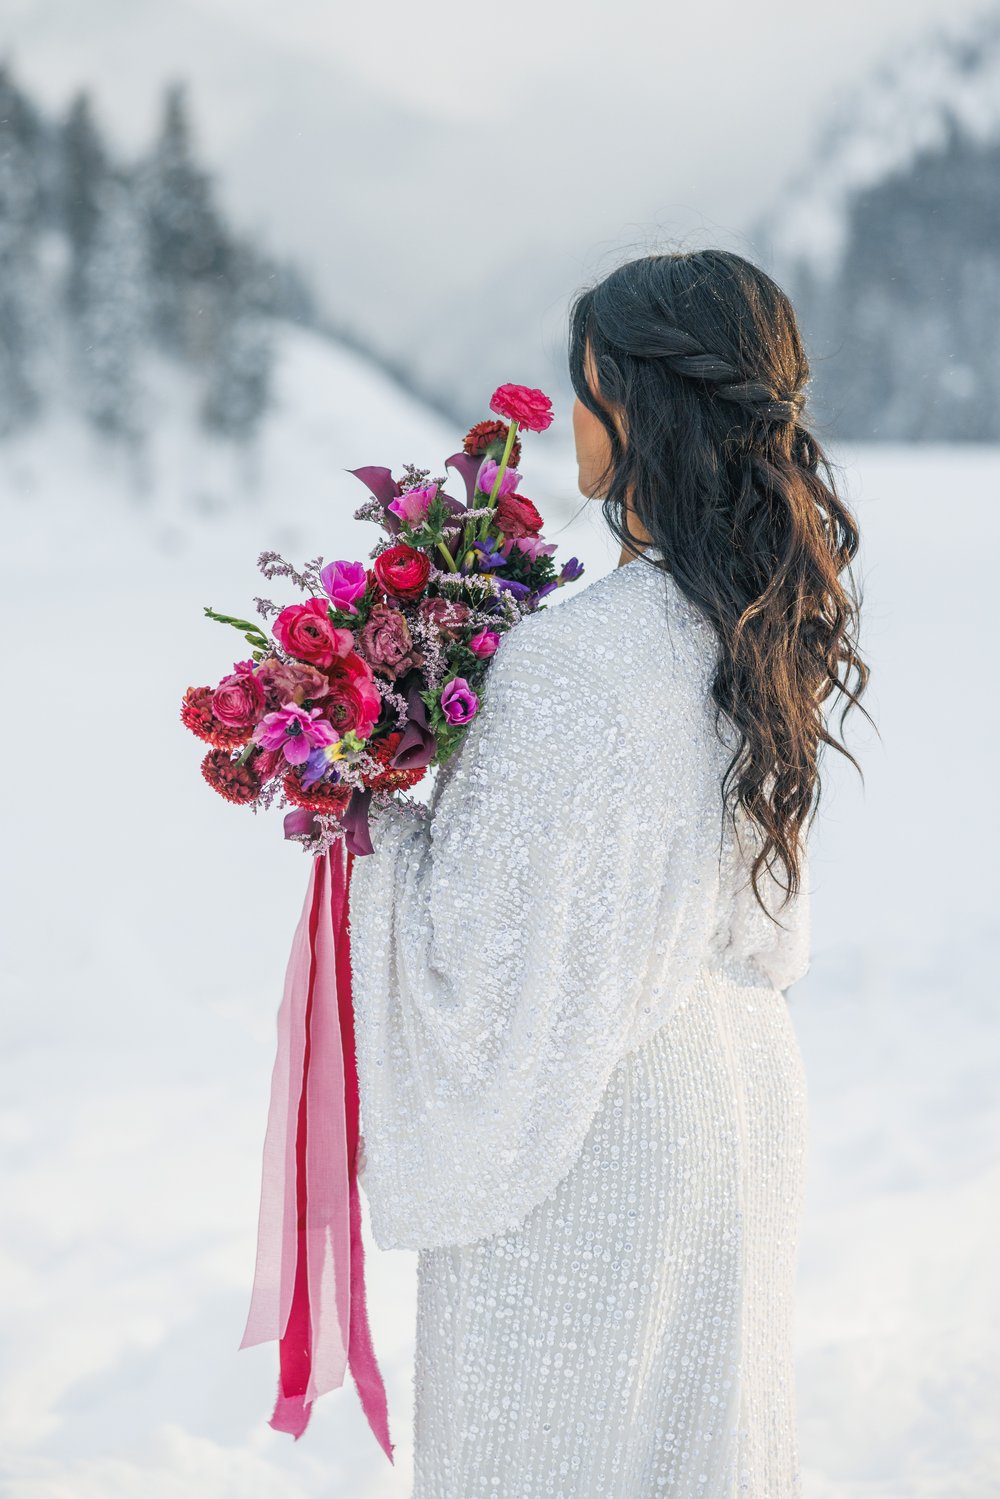  A bride holds her bouquet of flowers at Tibble Fork with golden light around her by Savanna Richardson Photography. #SavannaRichardsonPhotography #SavannaRichardsonBridals #WinterBridals #WinterWedding #TibbleForkBridals #UtahBridals #MountainBridal